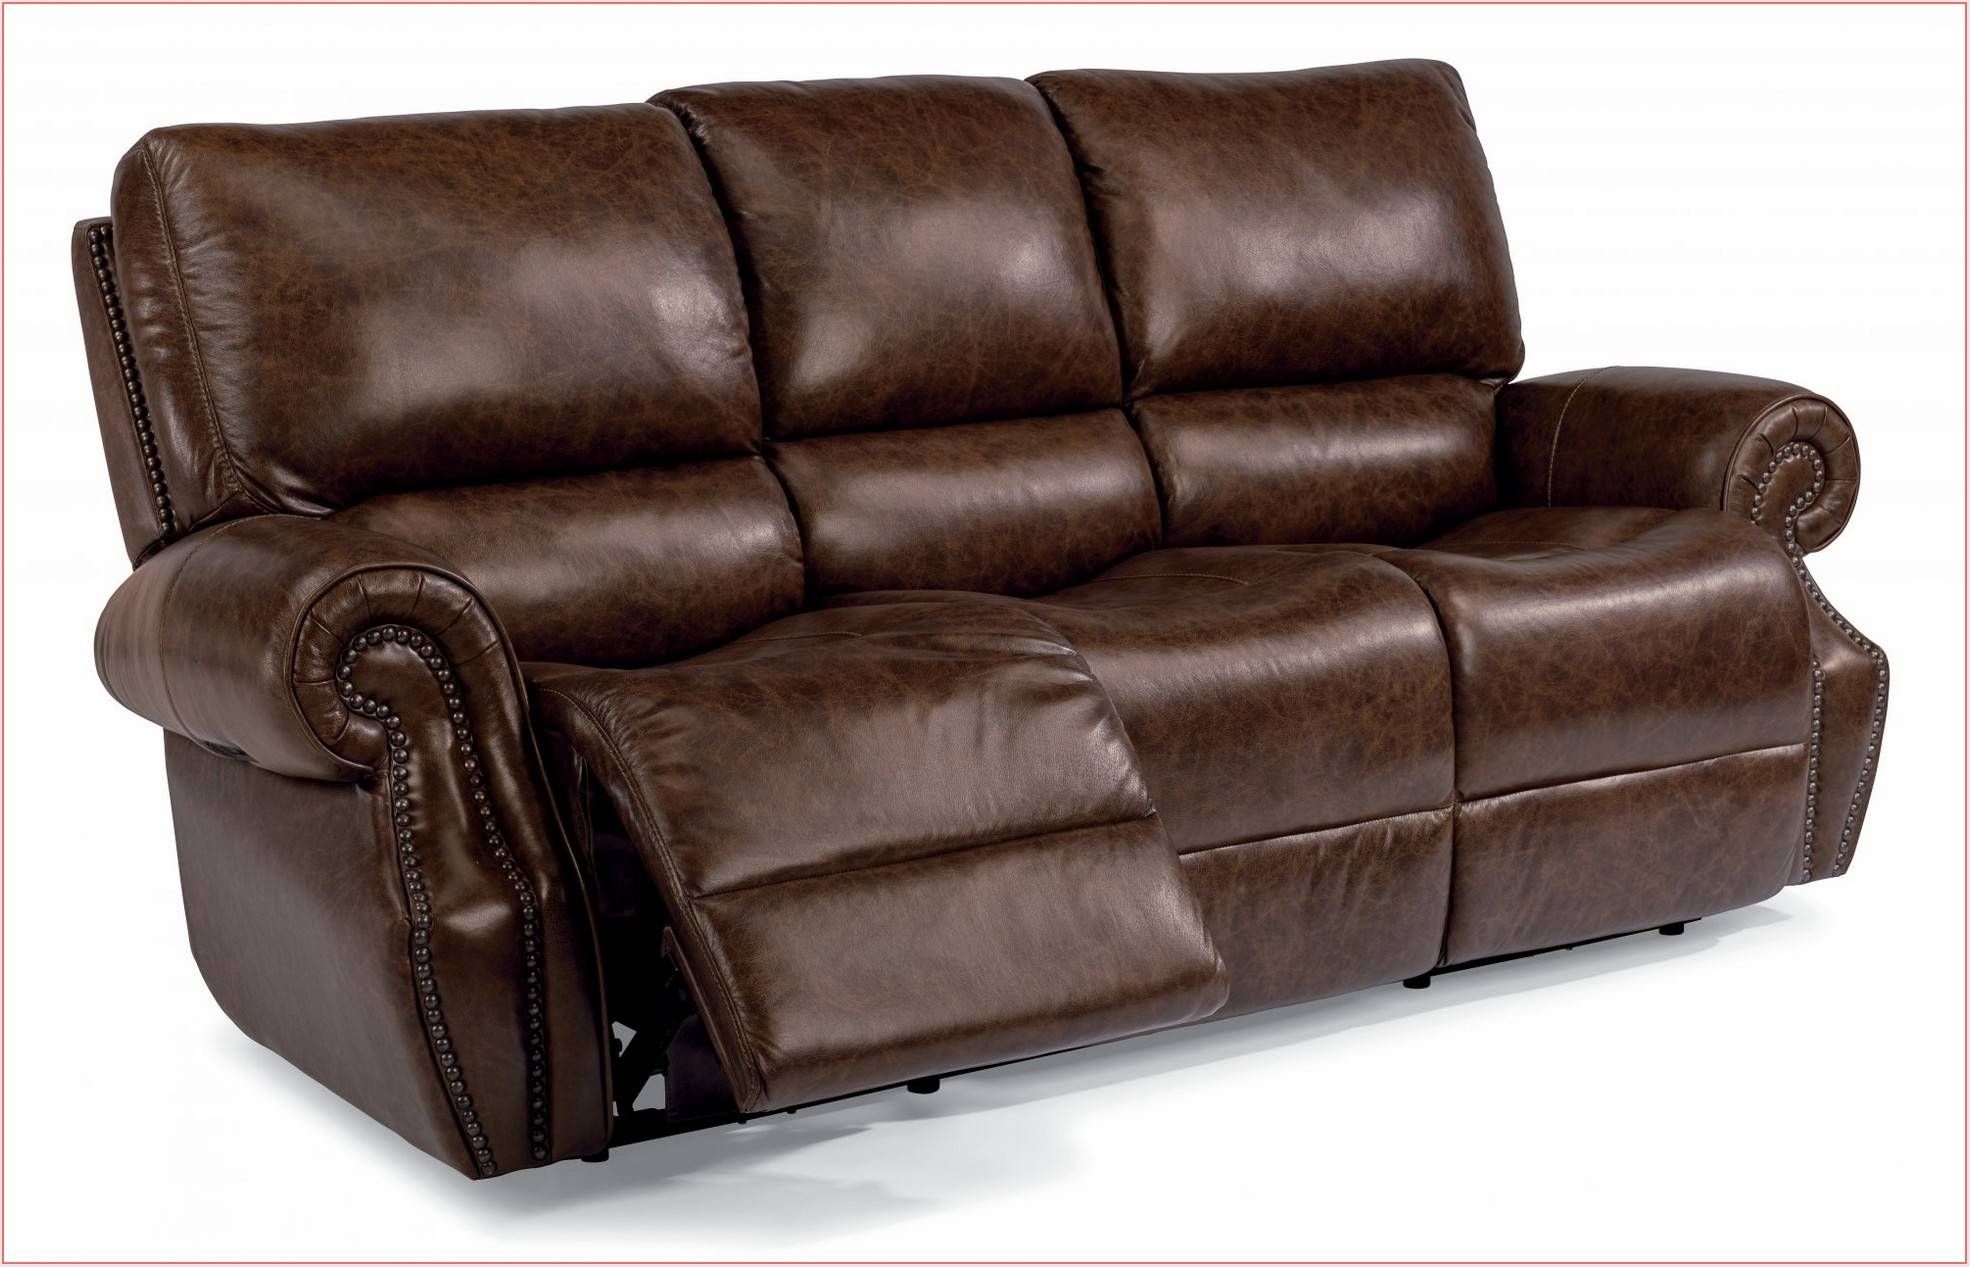 New Closeout Sectional Sofas 93 For Your The Brick Sectional Sofas With Brick Sofas (View 19 of 30)